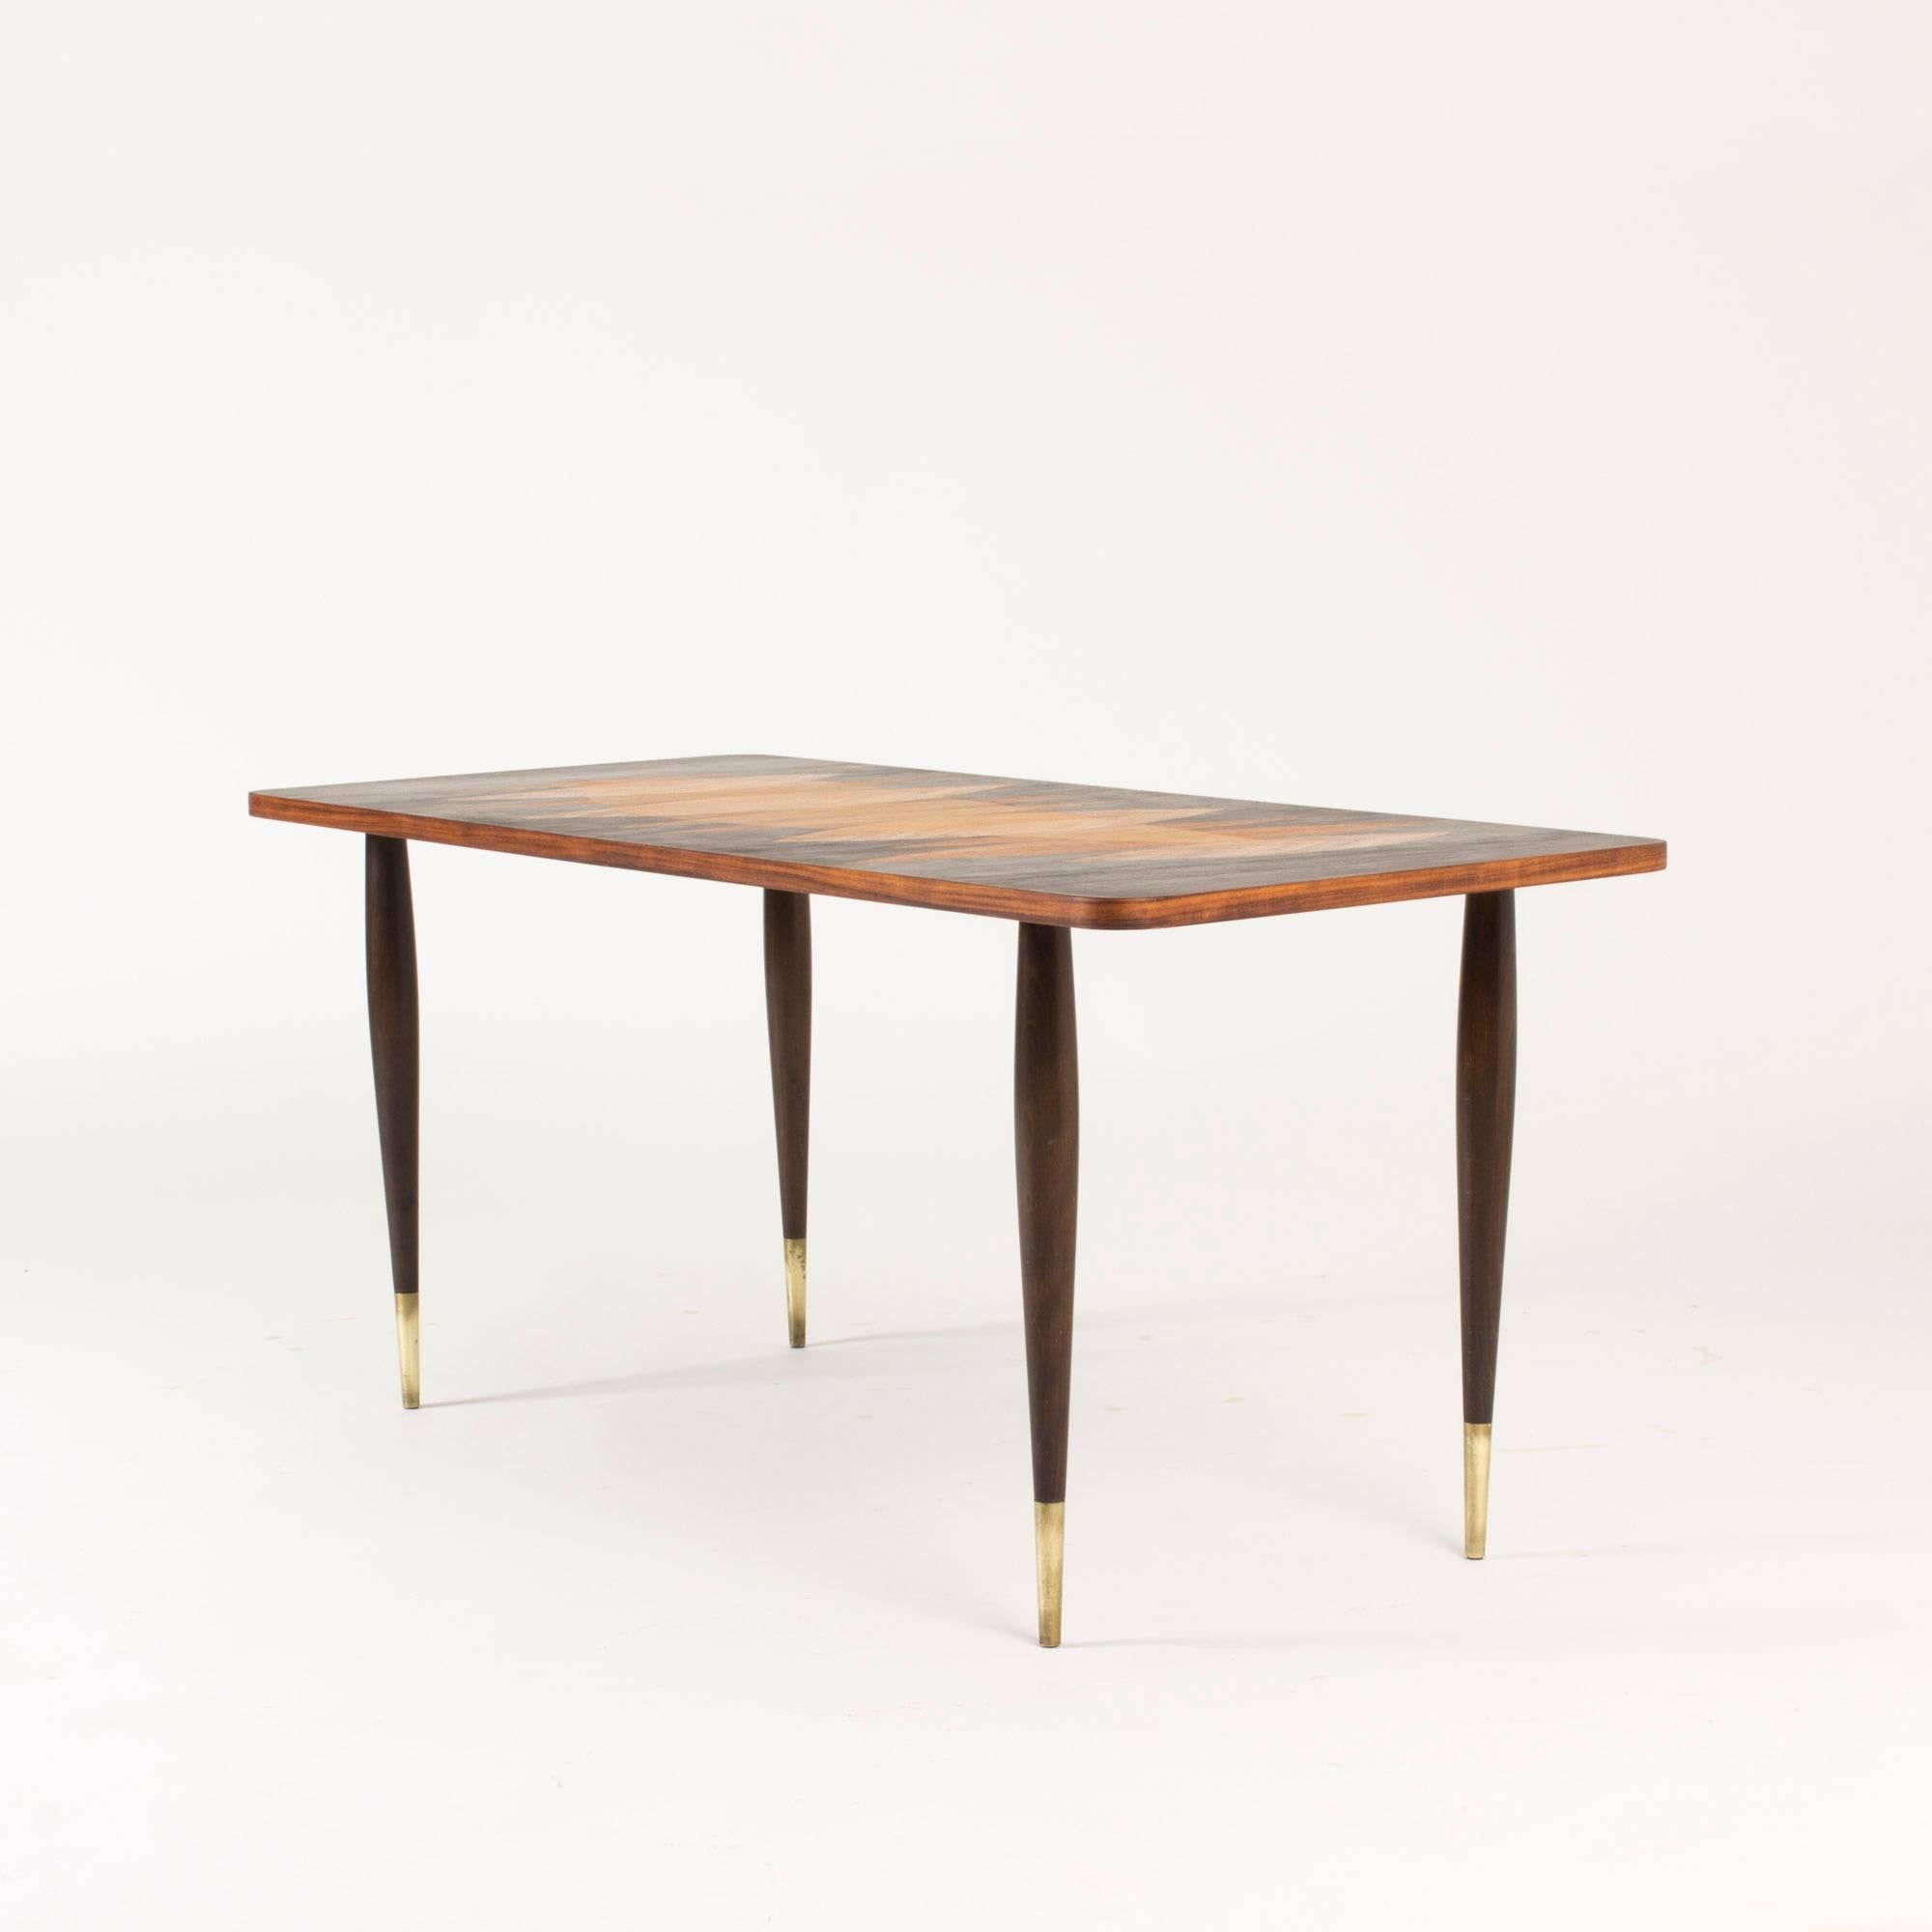 Rosewood coffee table by Bröderna Miller with striking inlays in a pattern of leaves in a contrasting nuance of wood. Legs with brass feet.